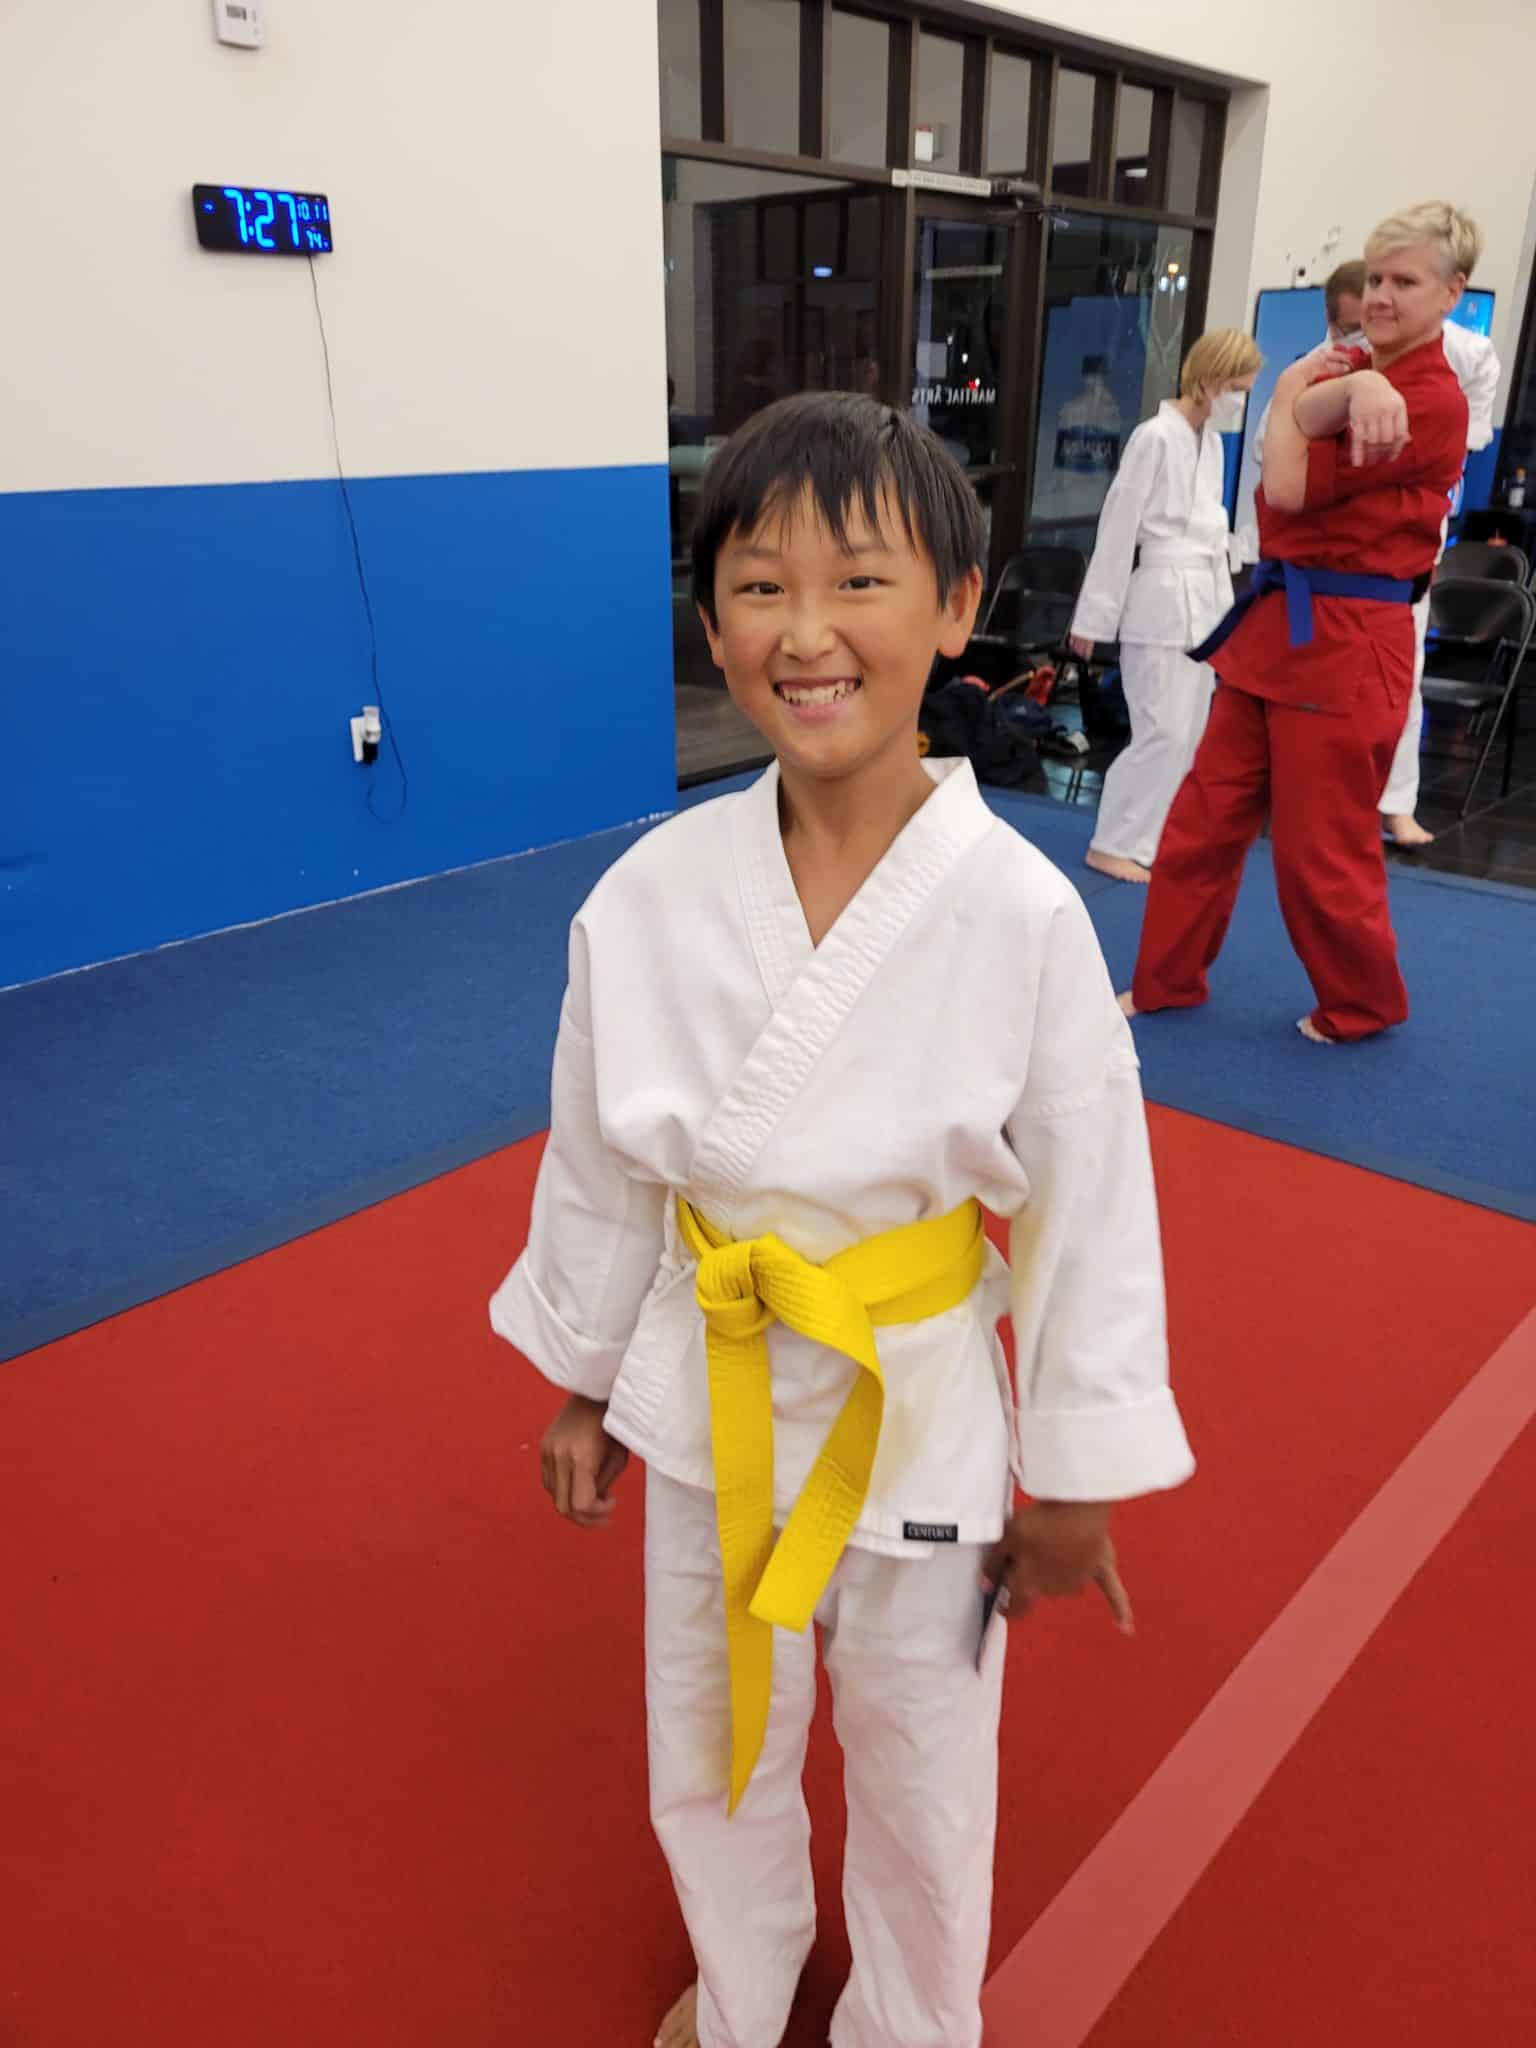 Chase with his yellow belt!  GO Chase!